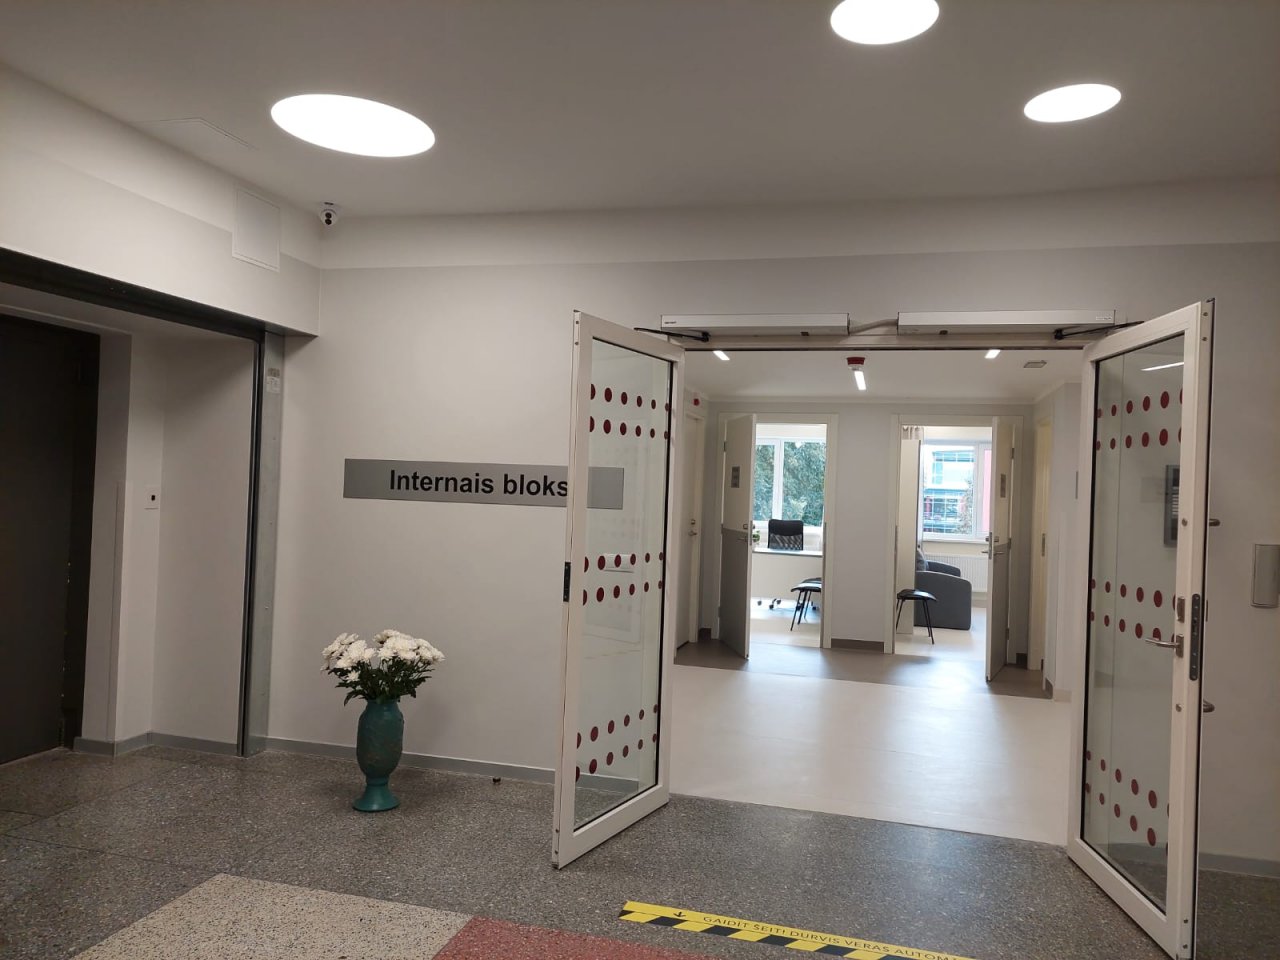 Completion of reconstruction and improvement work of the internal block and rehabilitation department of Dobele and surrounding hospital